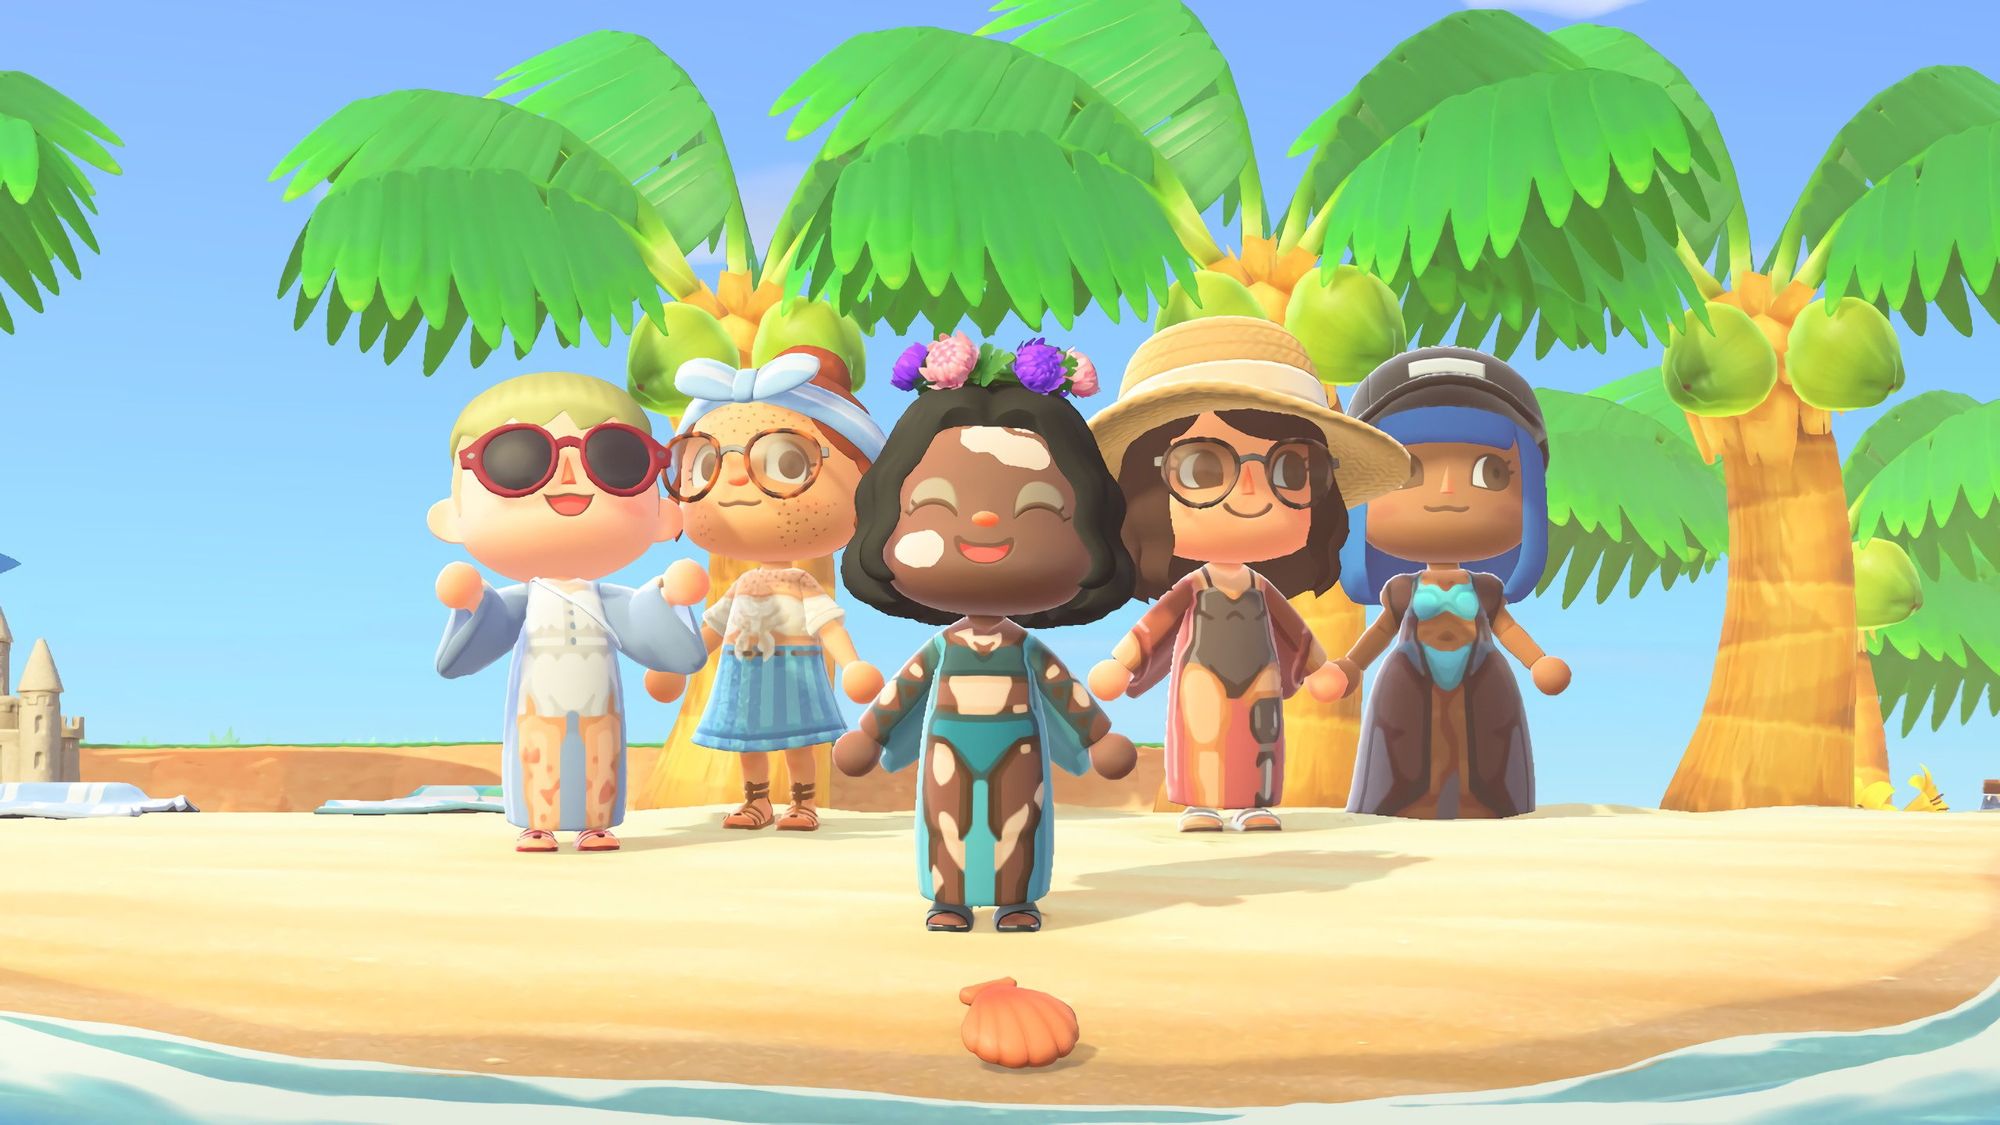 Animal Crossing Fans Are Making it More Inclusive, and That’s Awesome